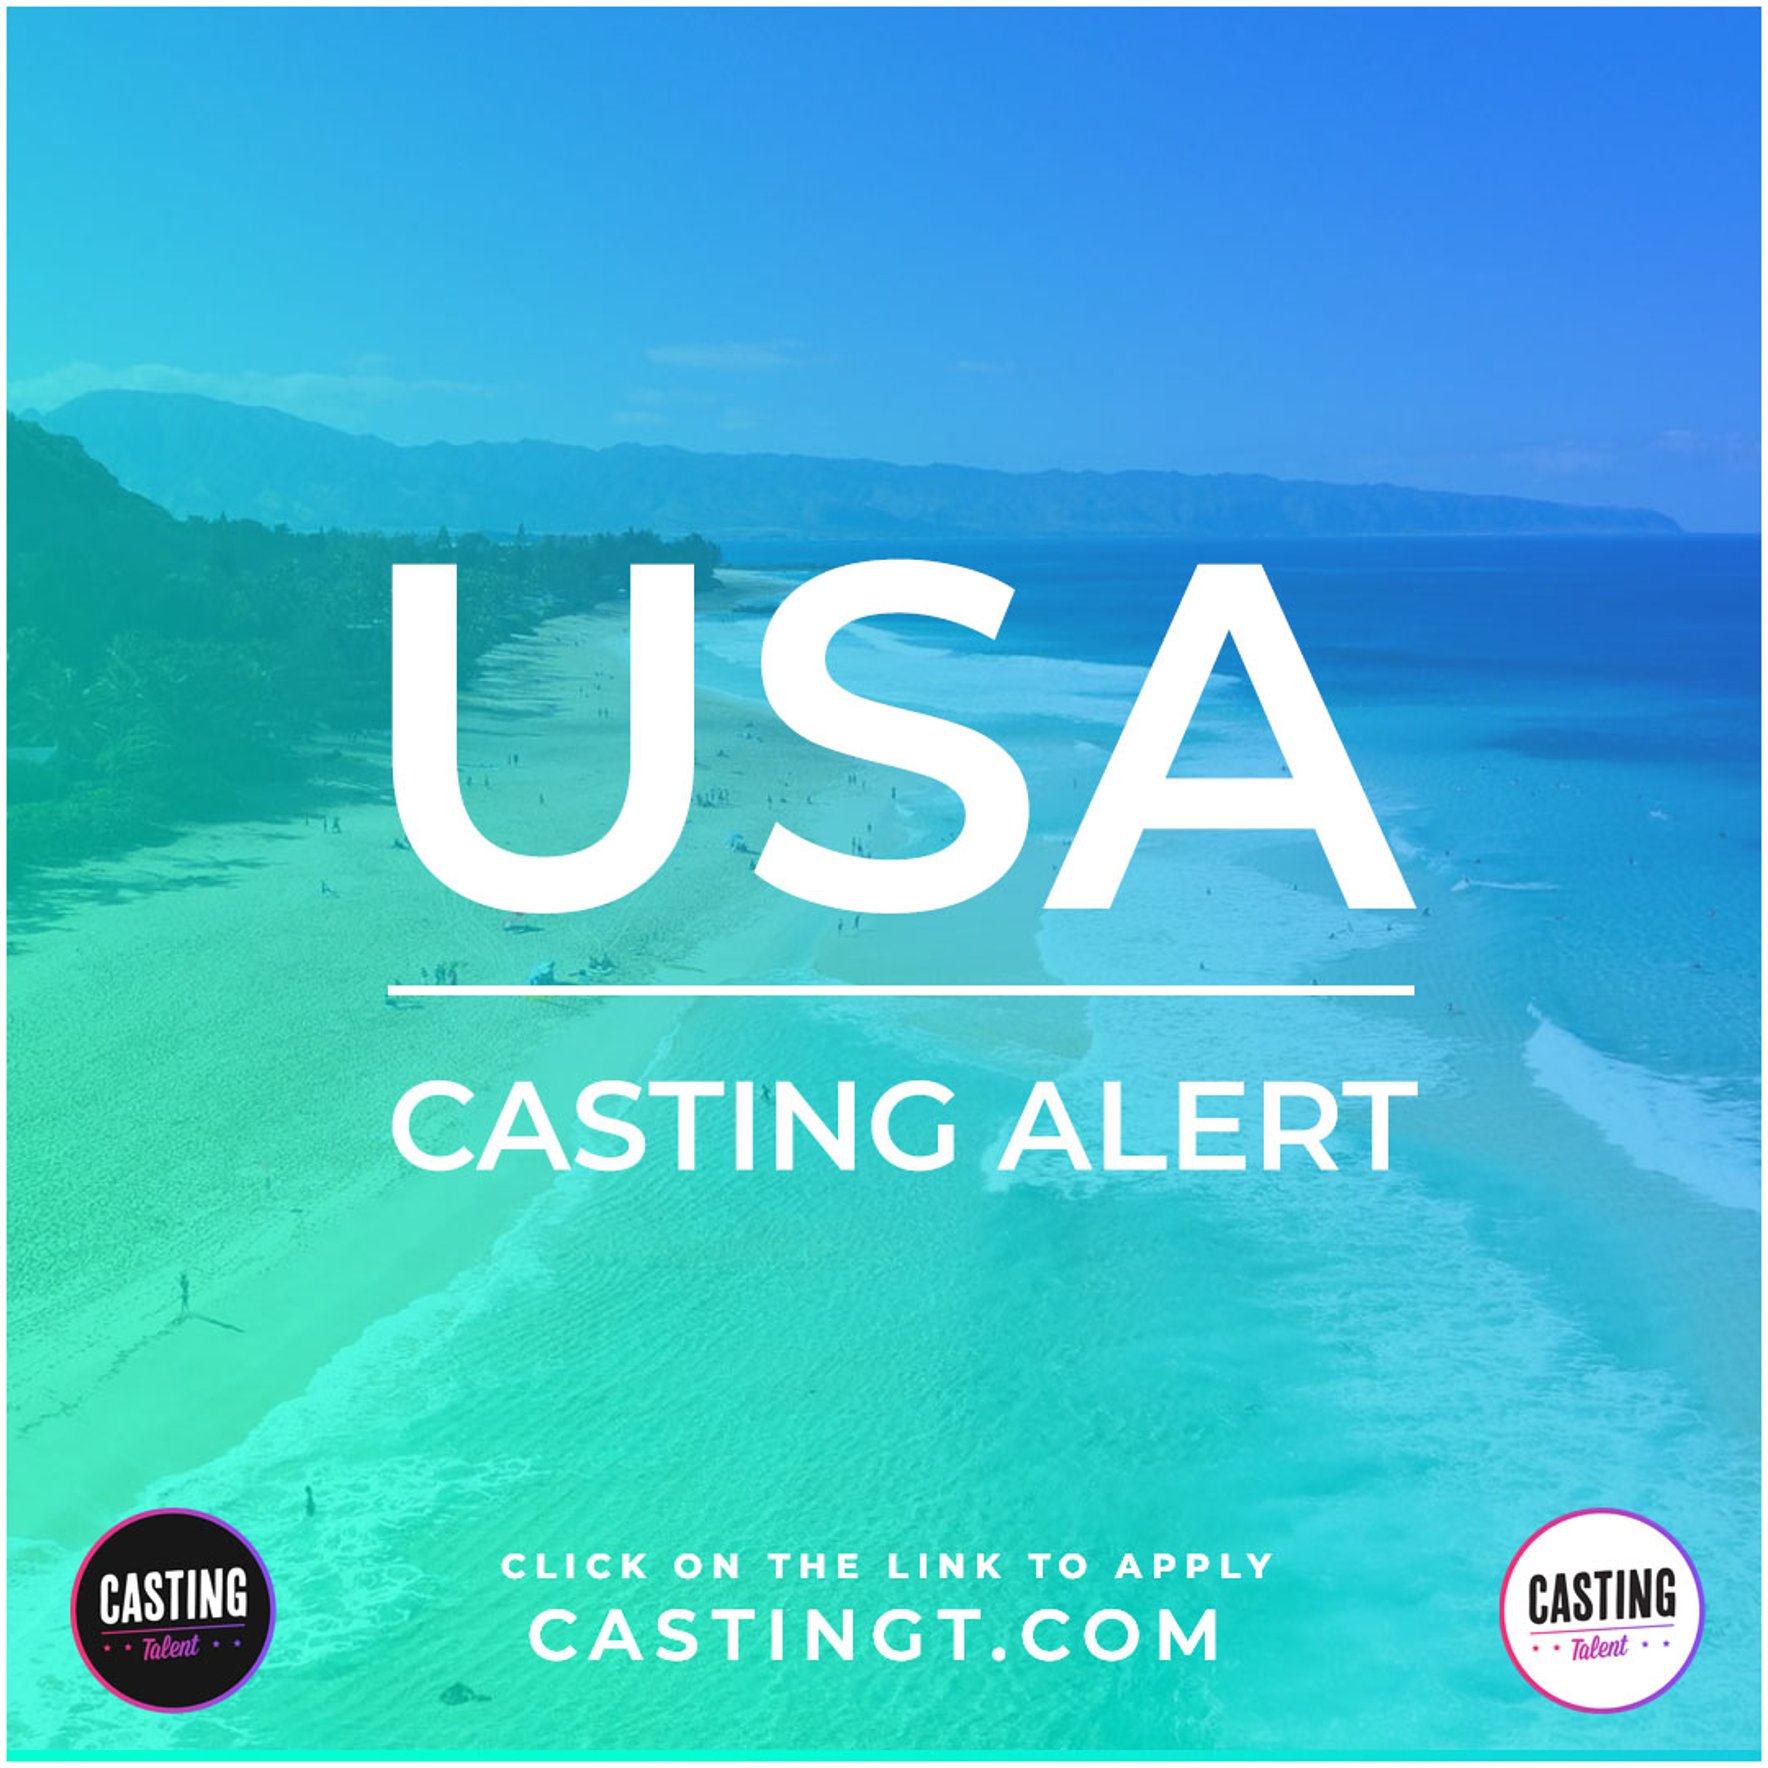 Commercial Casting Roles in Hawaii